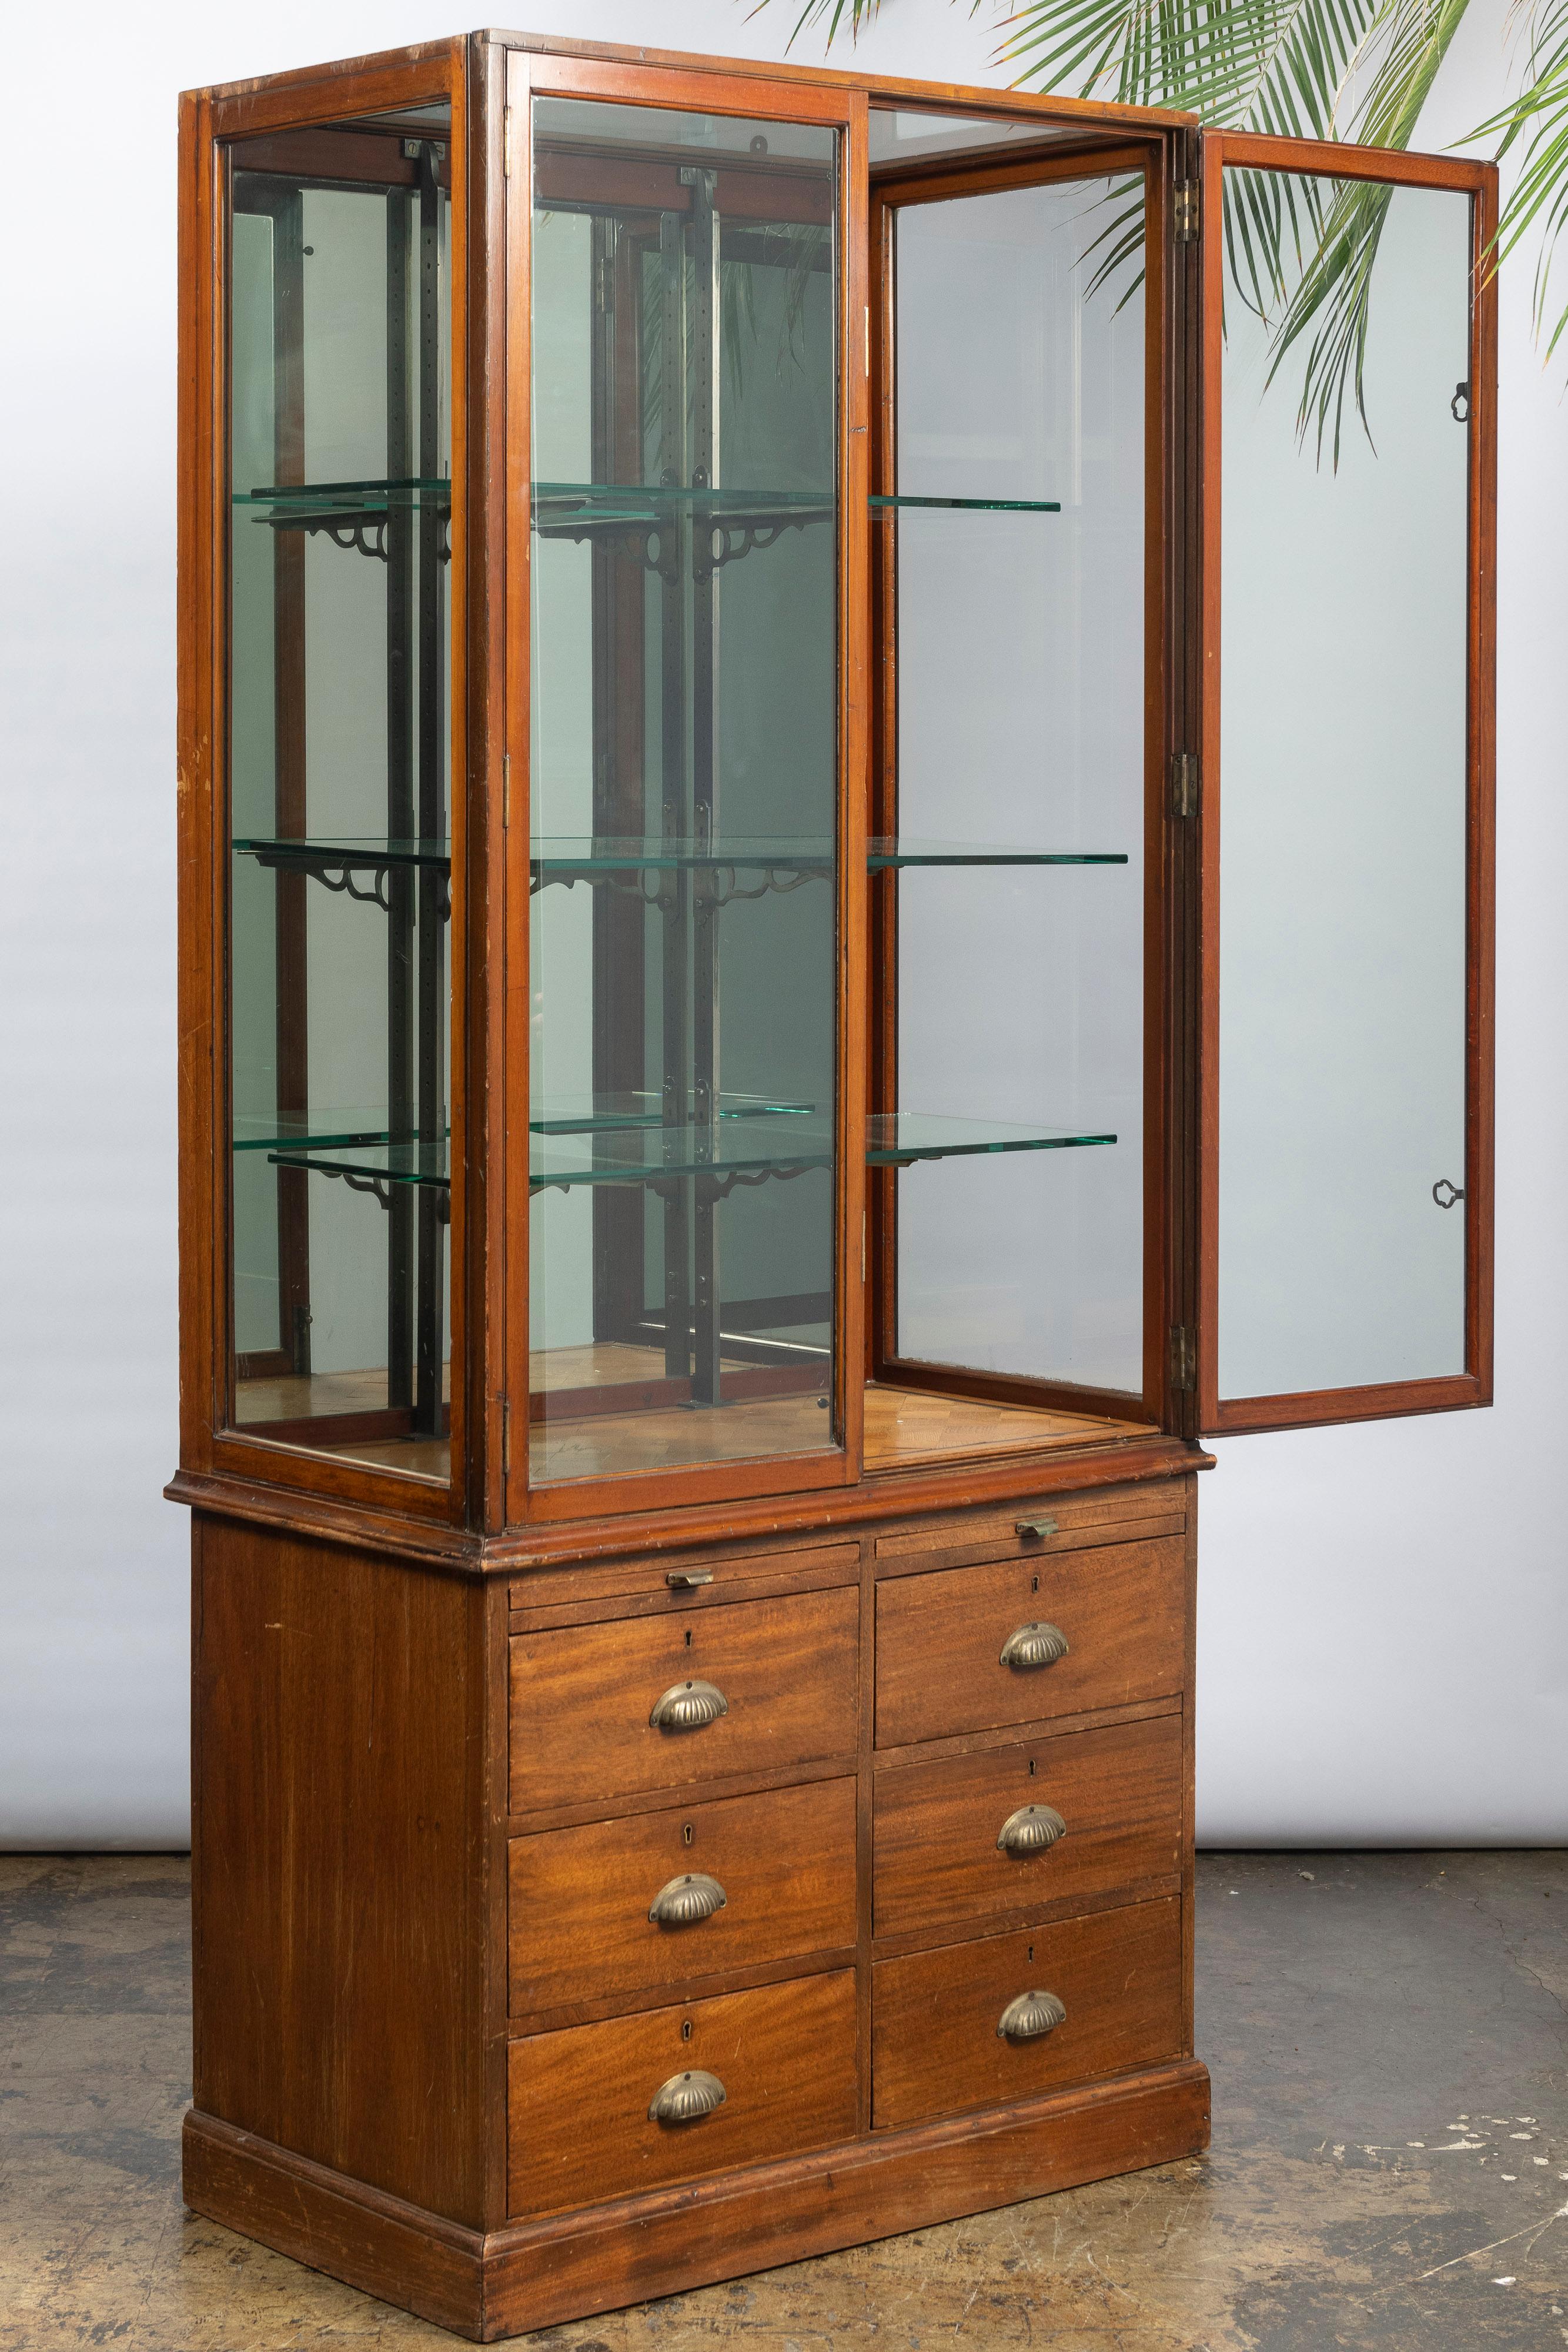 Antique English Haberdashery or Apothecary Cabinet, with Wood and Glass For Sale 5